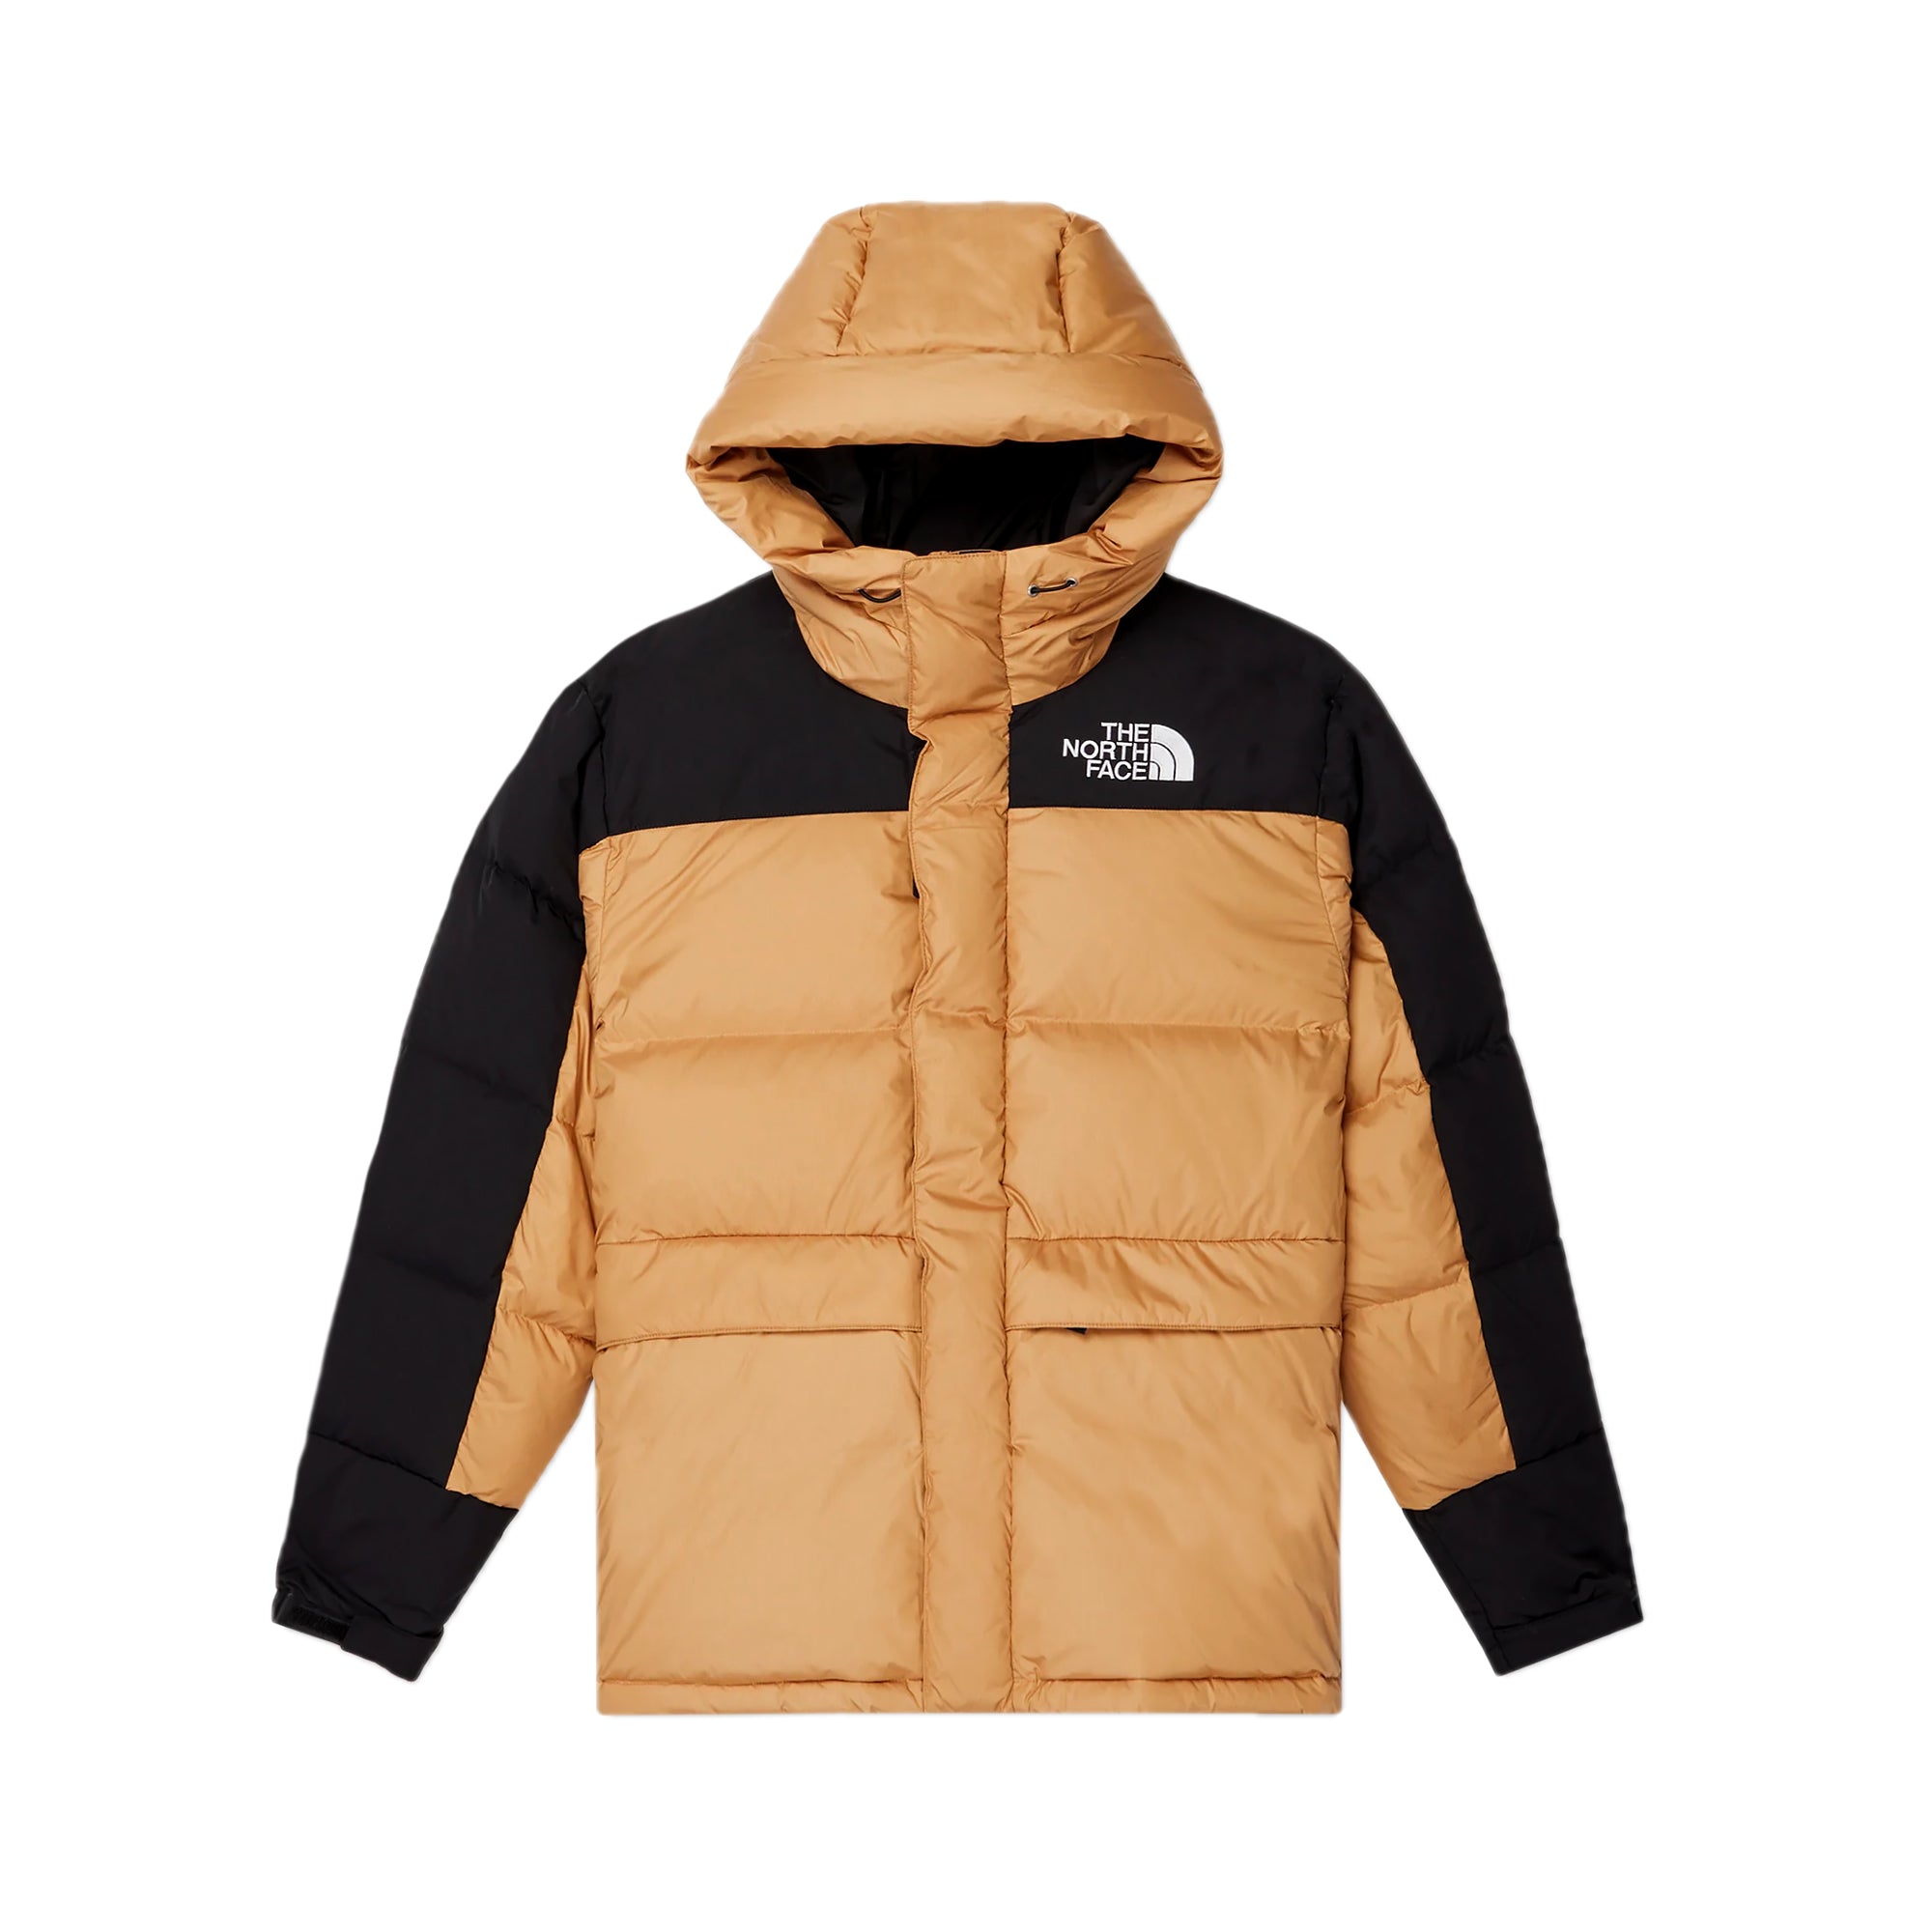 The North Face Men's Hmlyn Down Parka  Mens parka, The north face, North  face mens